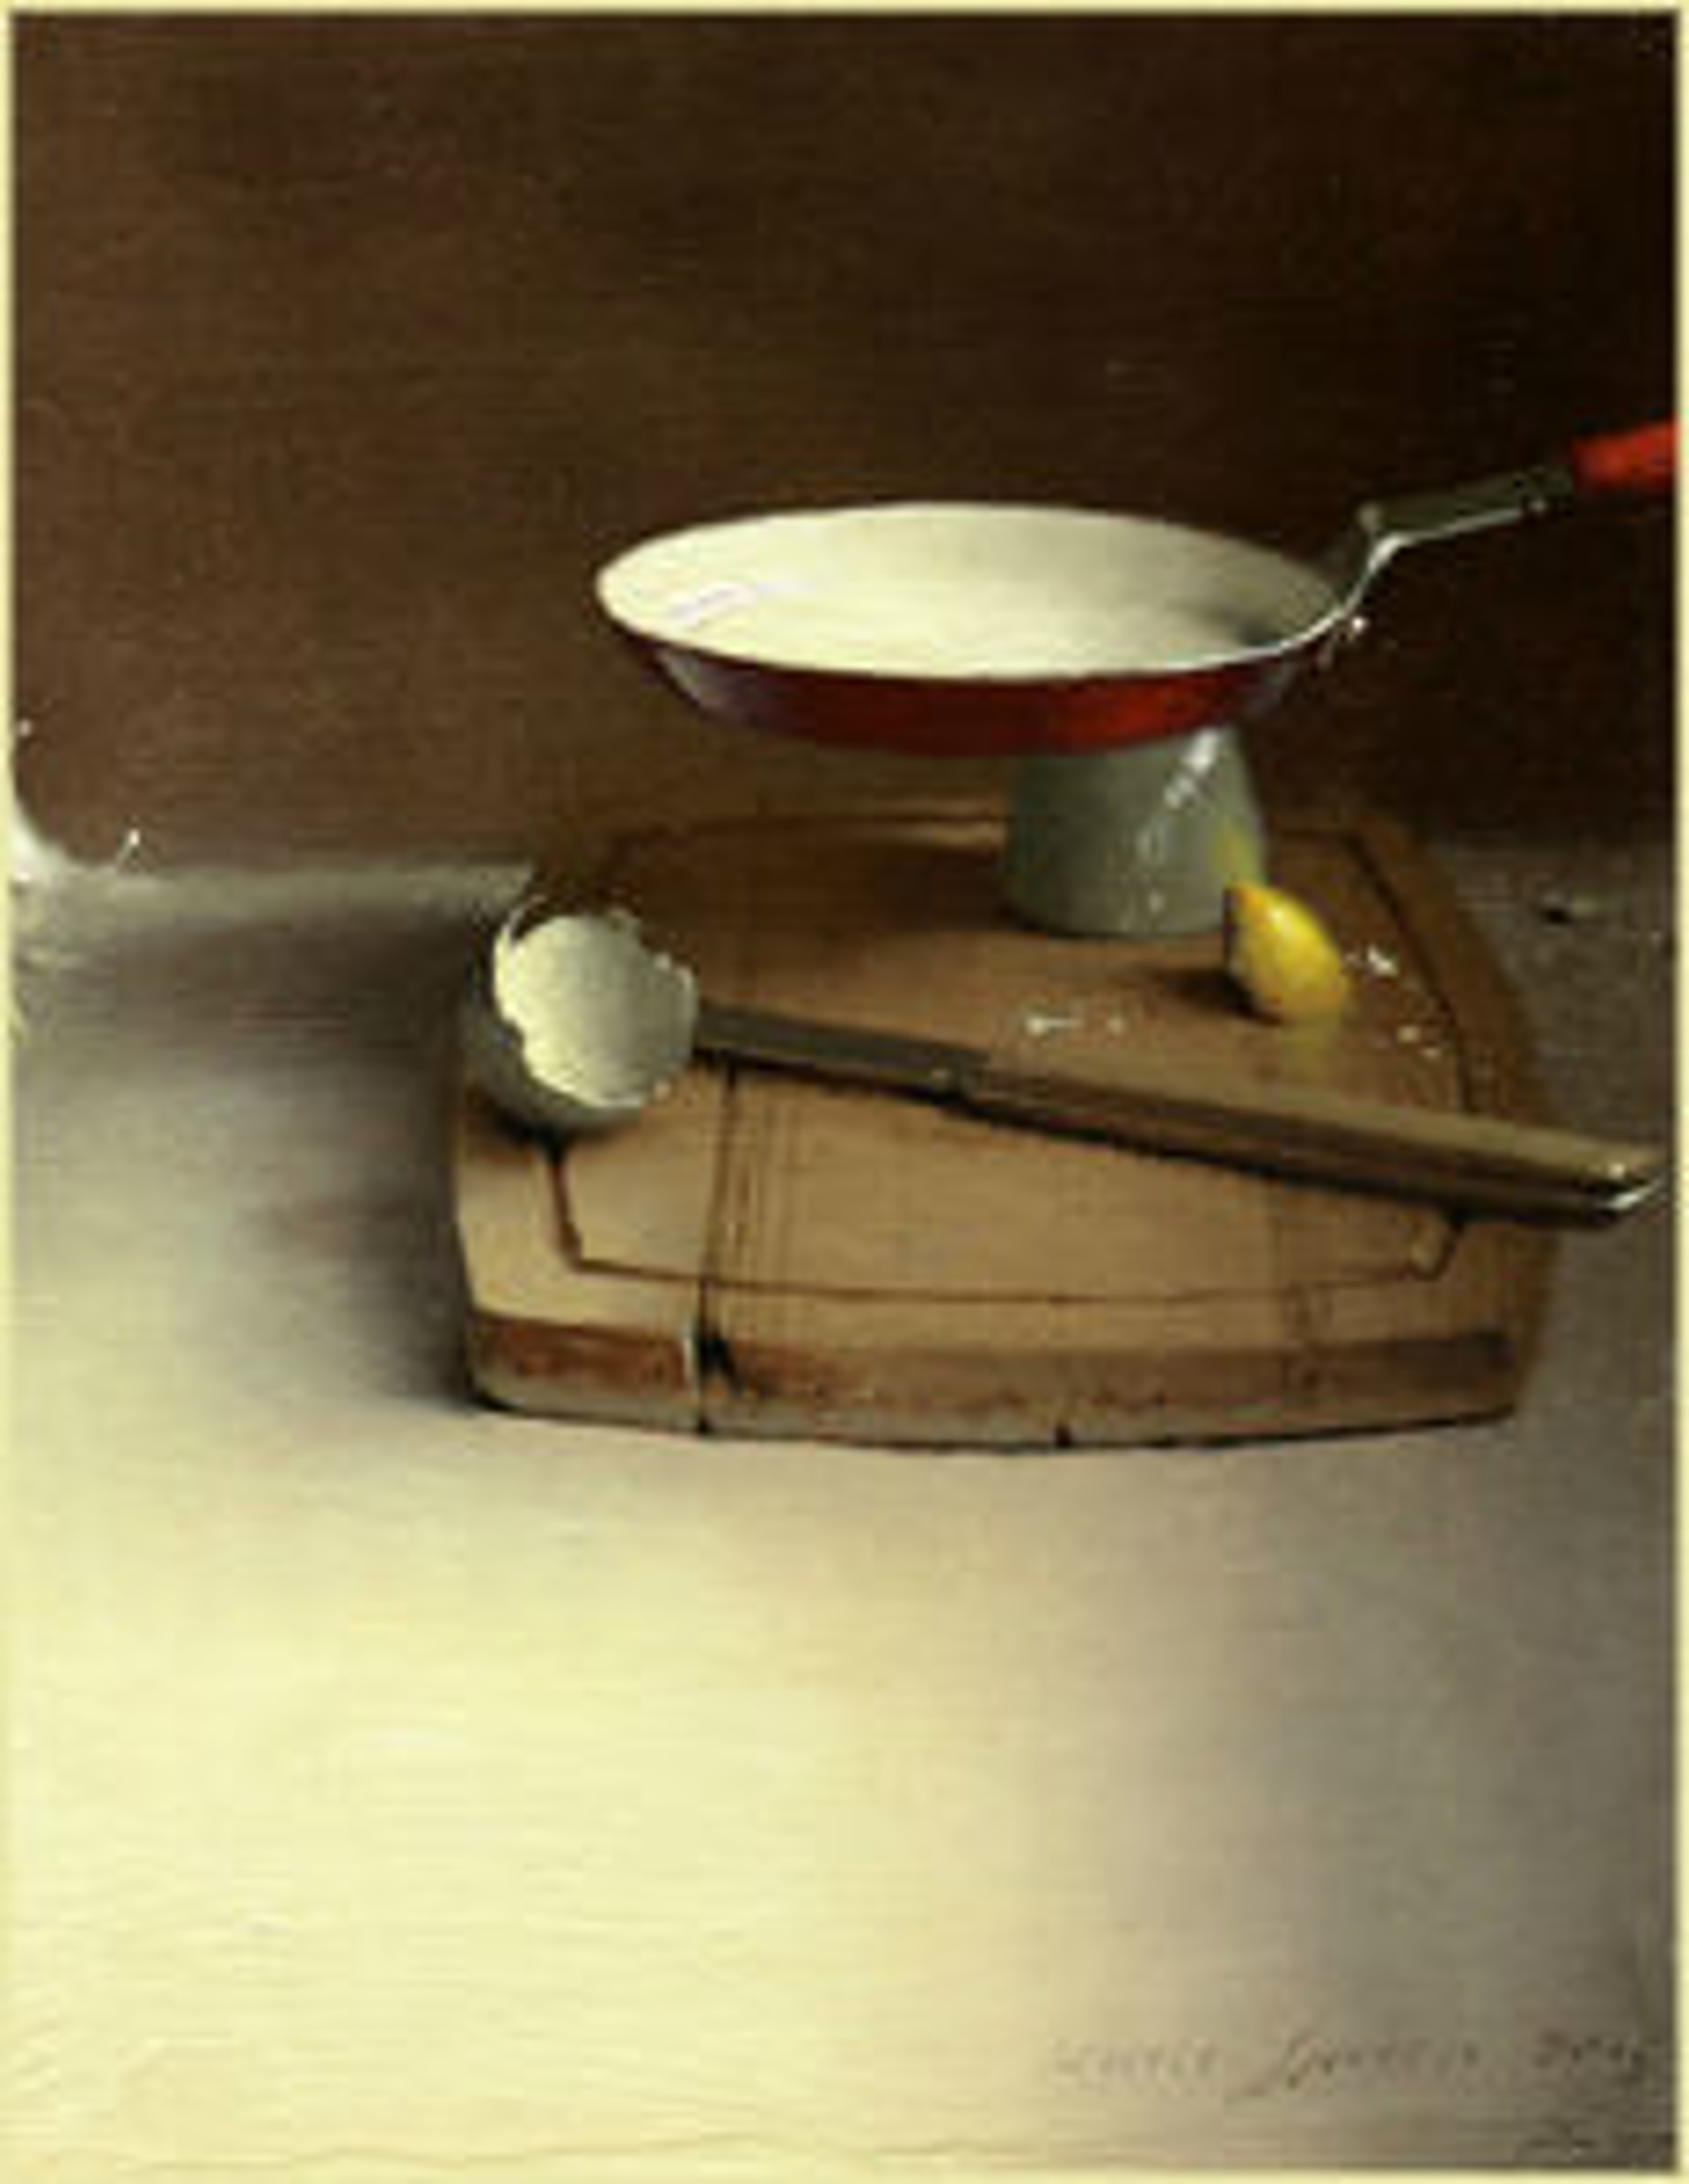 Red Pan and Cutting Board by Daniel Sprick